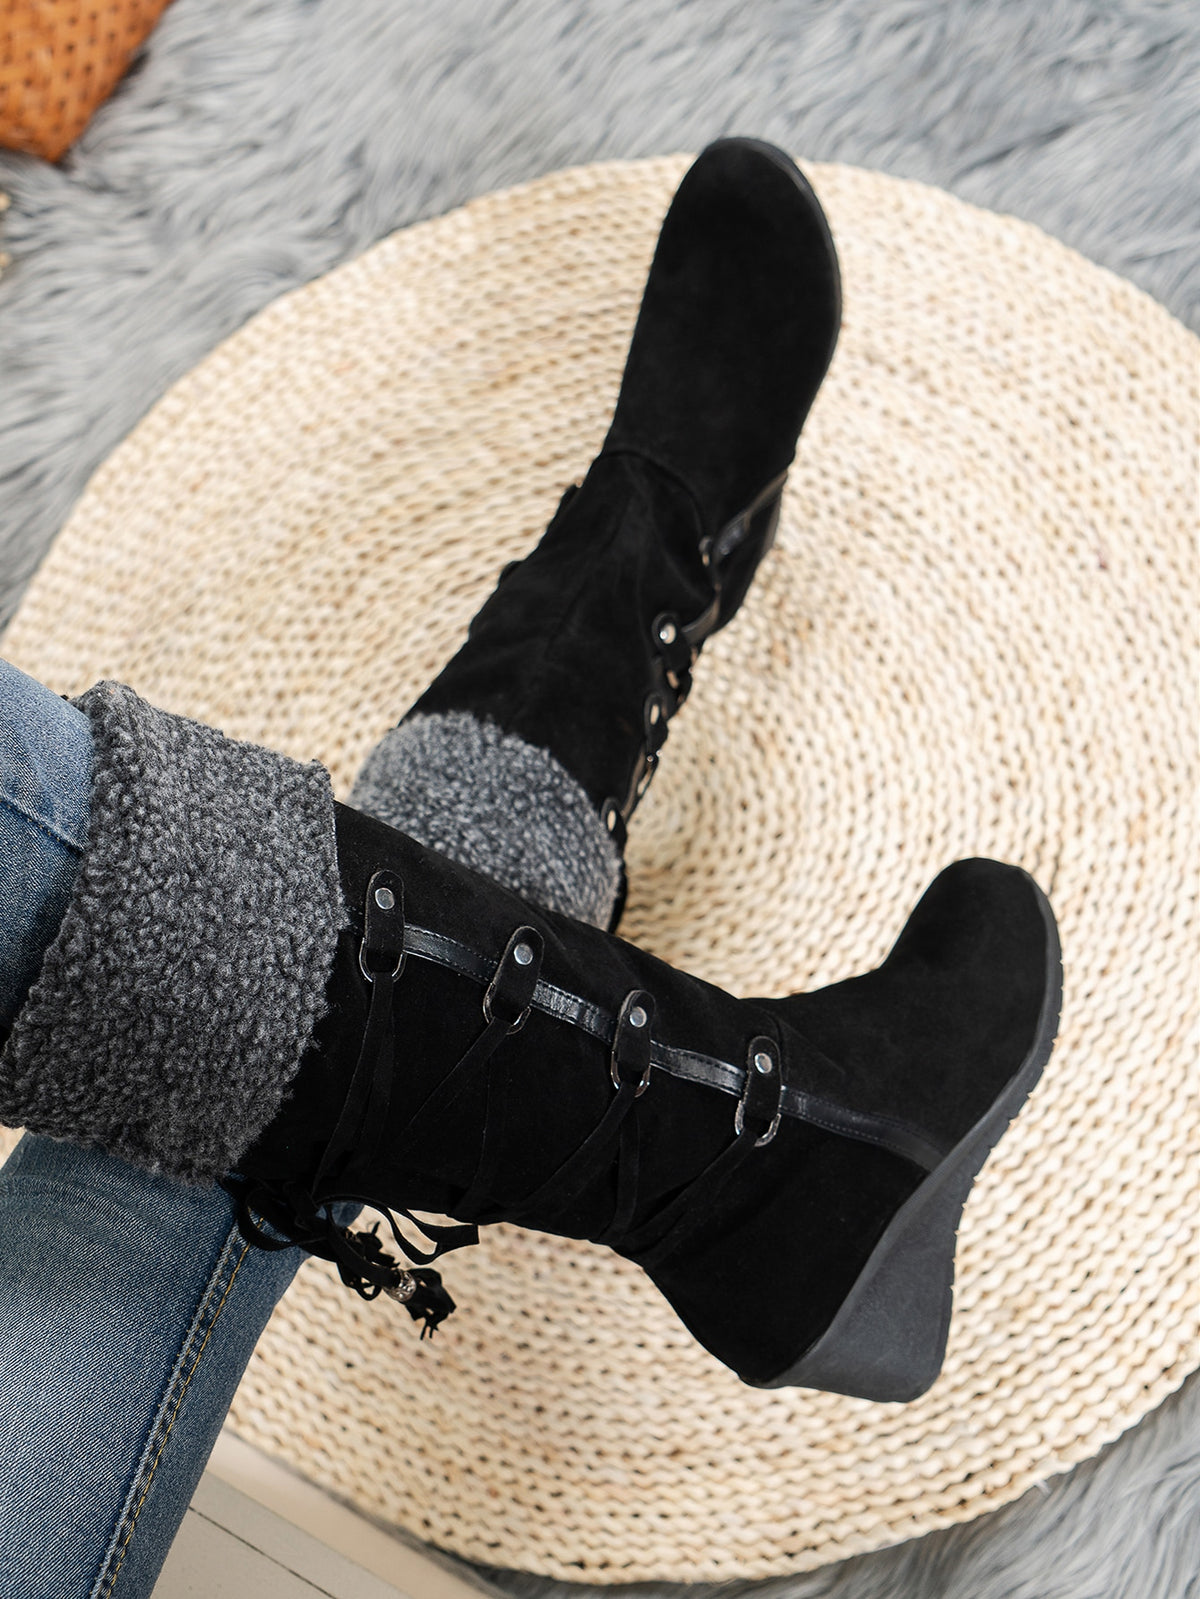 Women's Faux Suede Boot with Fuzzy Panel and Tassel and Stud Accents